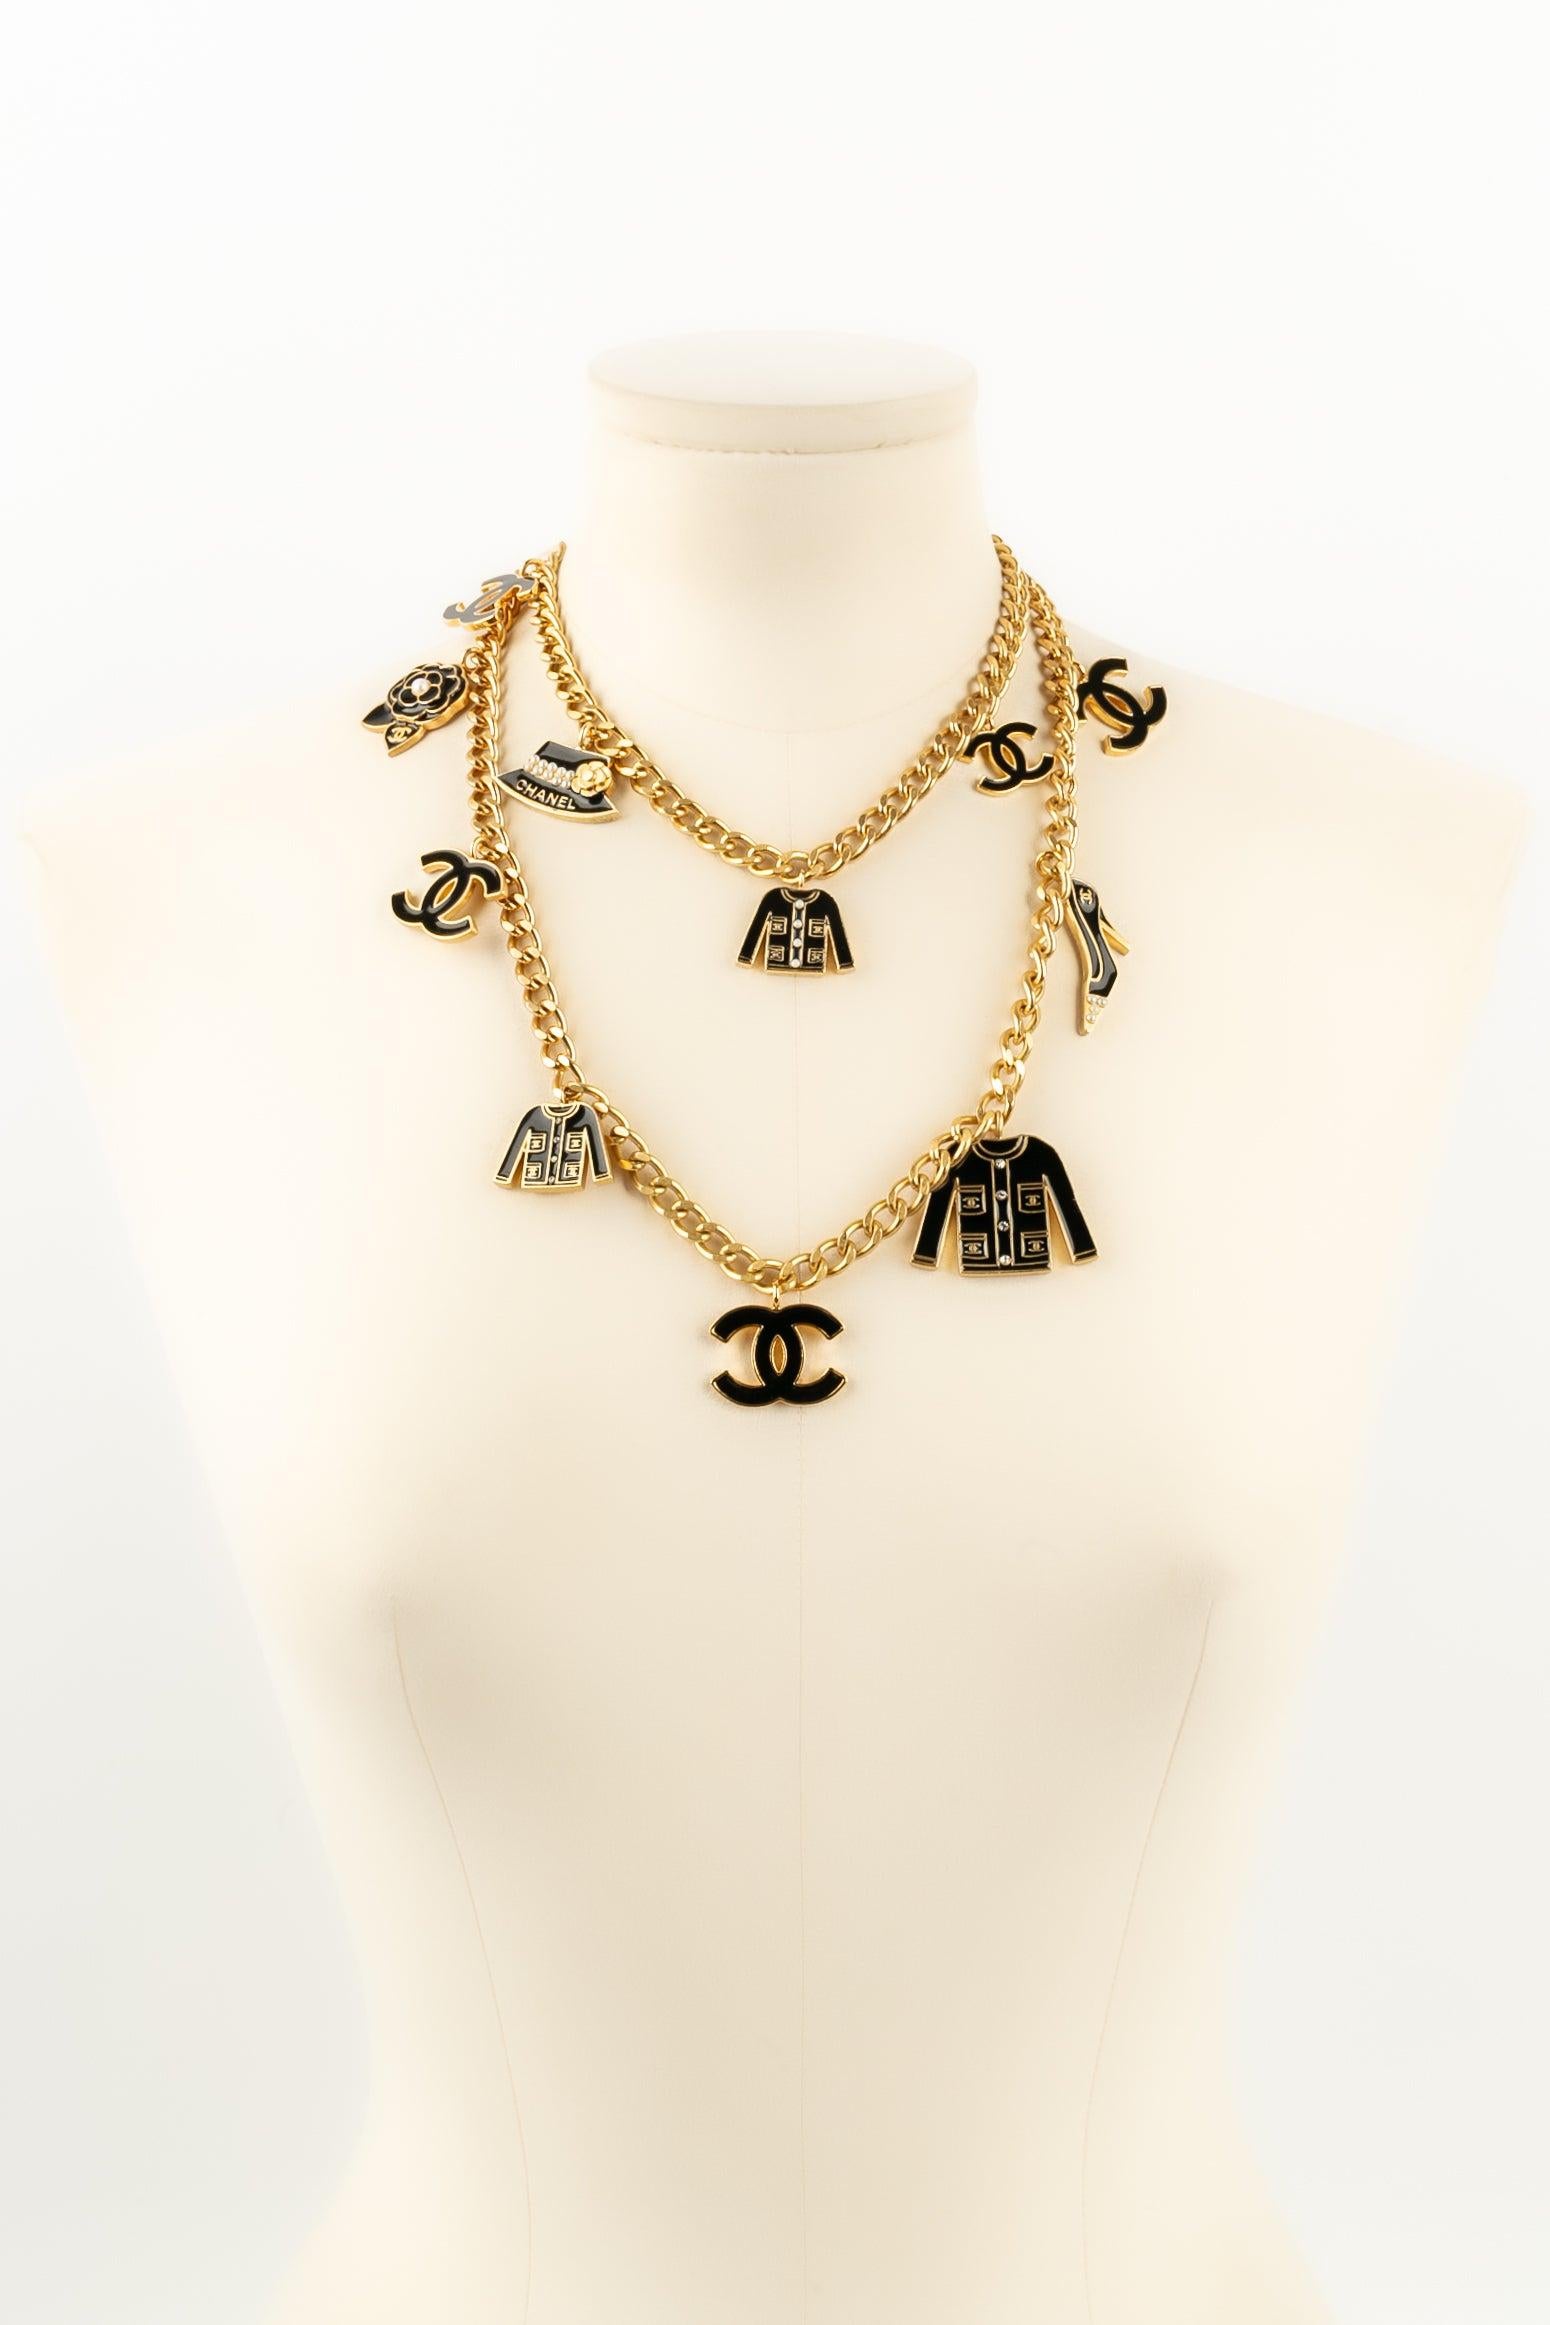 Chanel Long Necklace in Gold-Plated Metal and Charms, 2002 For Sale 4